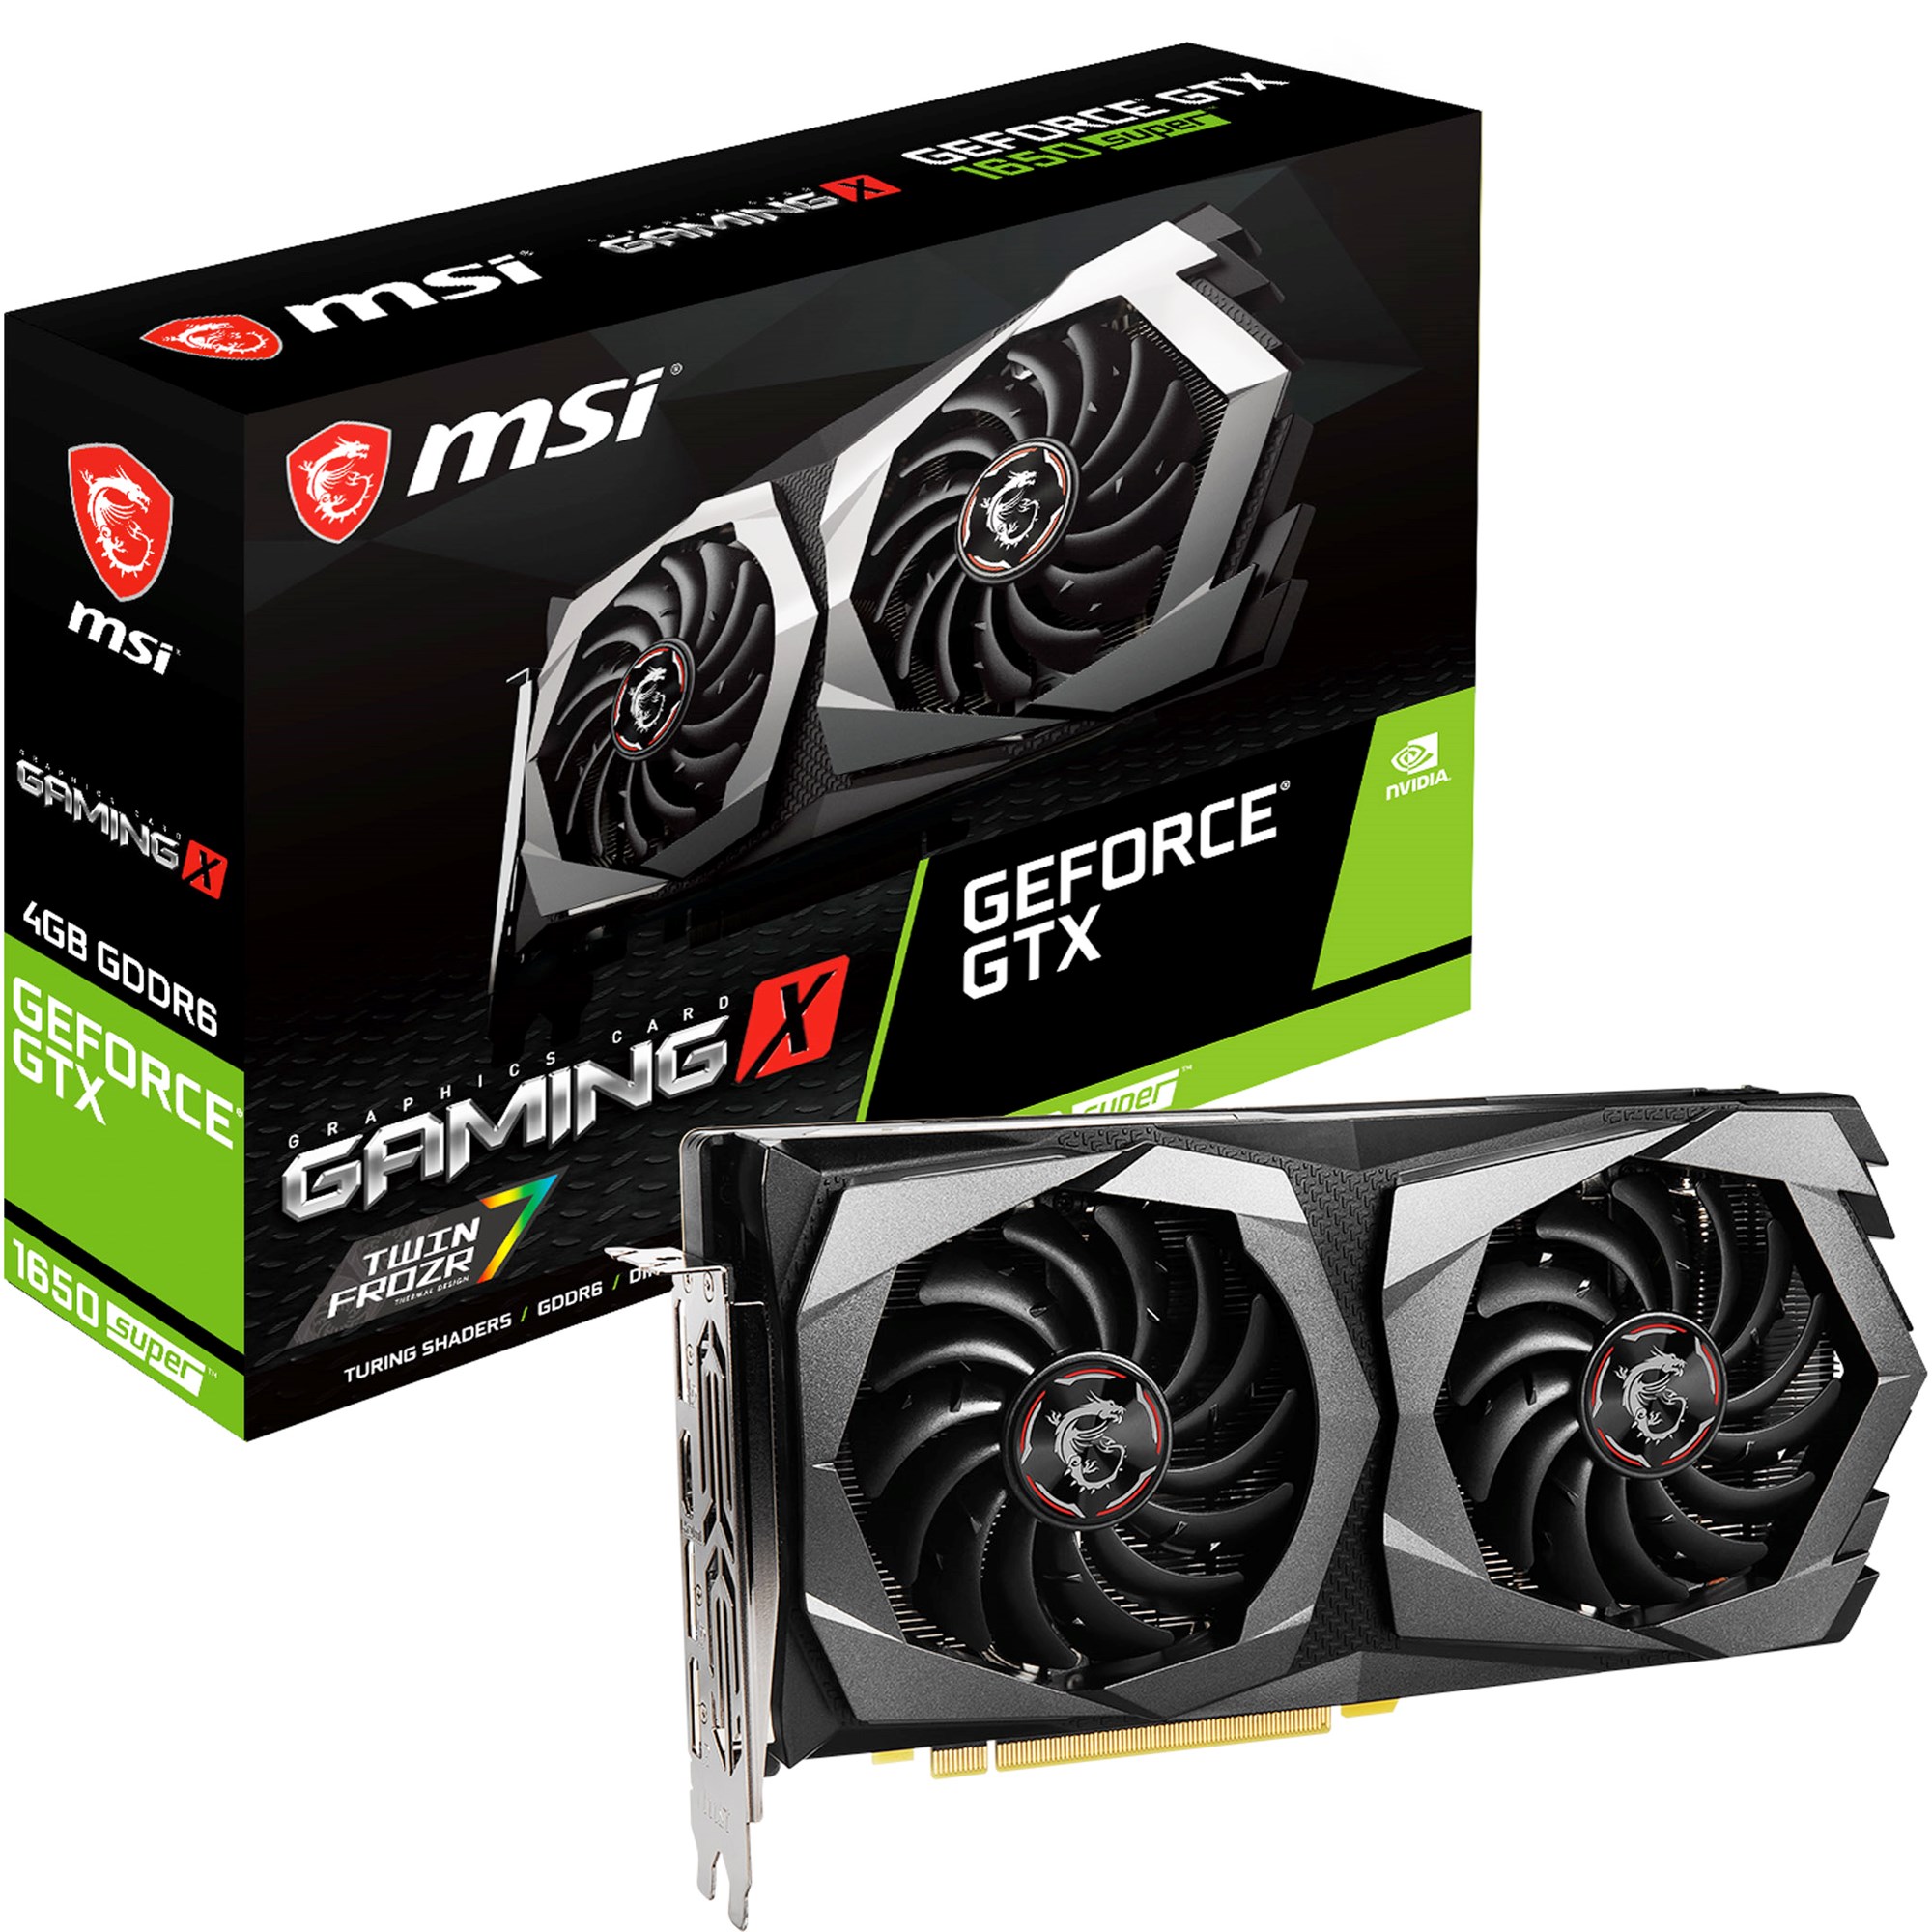 Graphics Cards between £150 and £200 